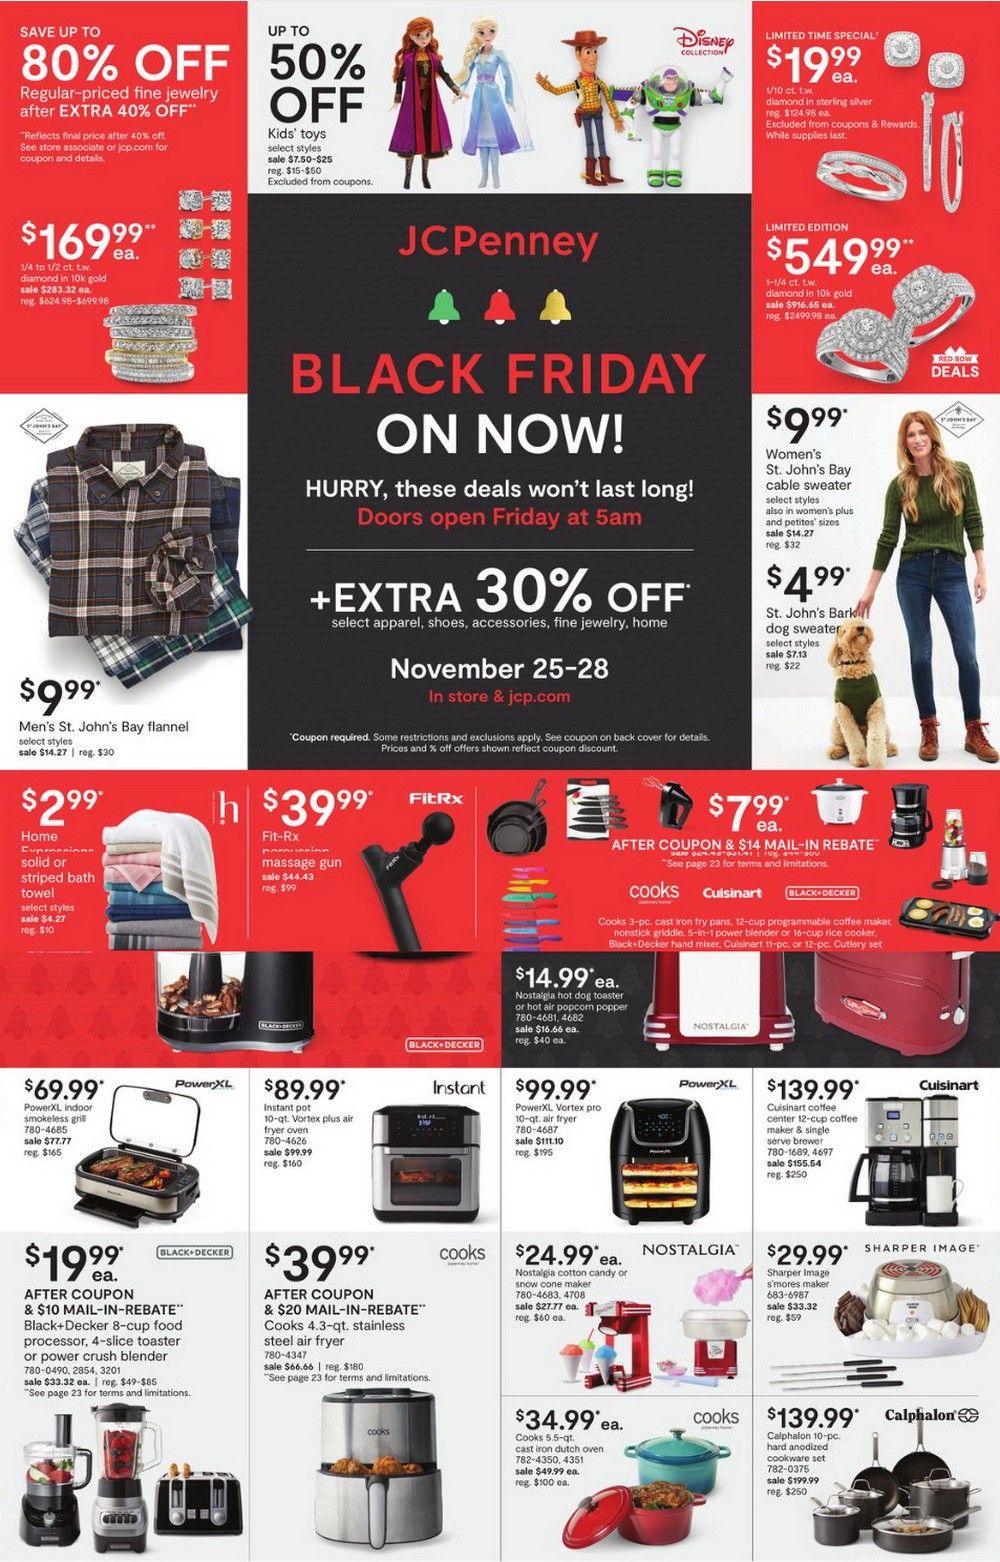 JCPenney Black Friday Ad Nov 25 – Nov 28, 2020 - What Department Stores Have Black Friday Deals